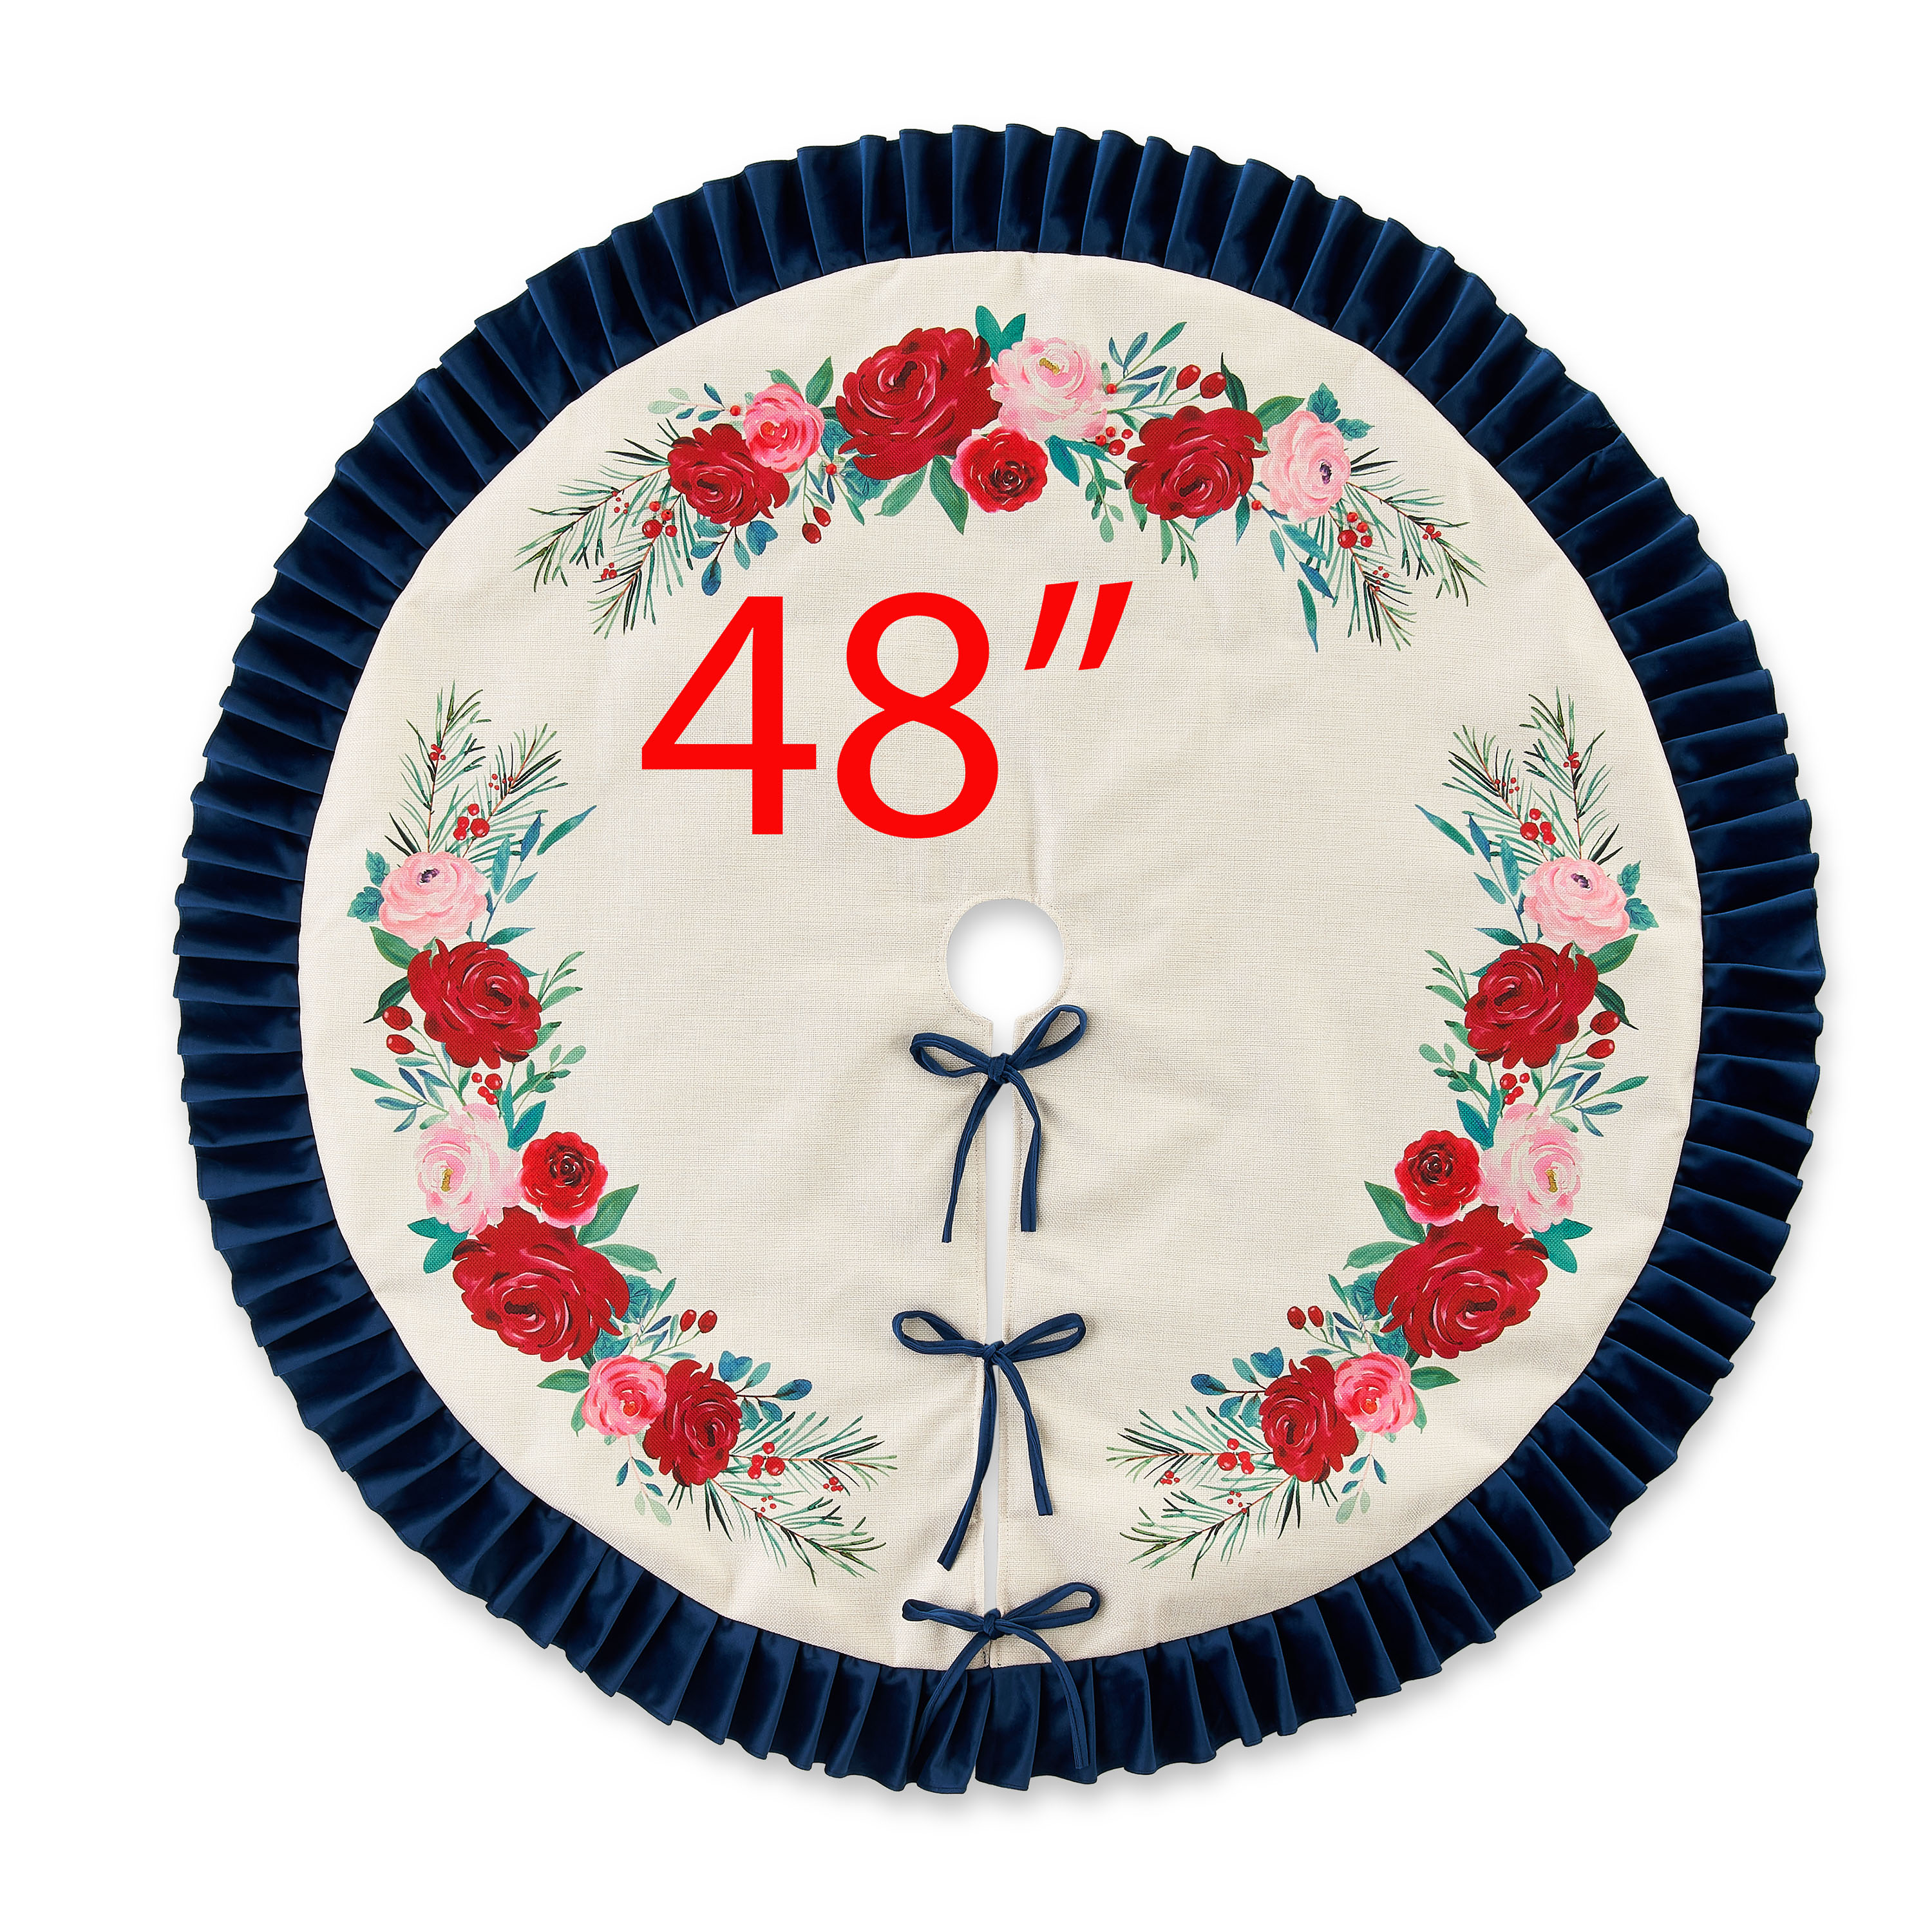 The Pioneer Woman Blue Ruffle & Red Roses Christmas Tree Skirt, 48" - image 4 of 5